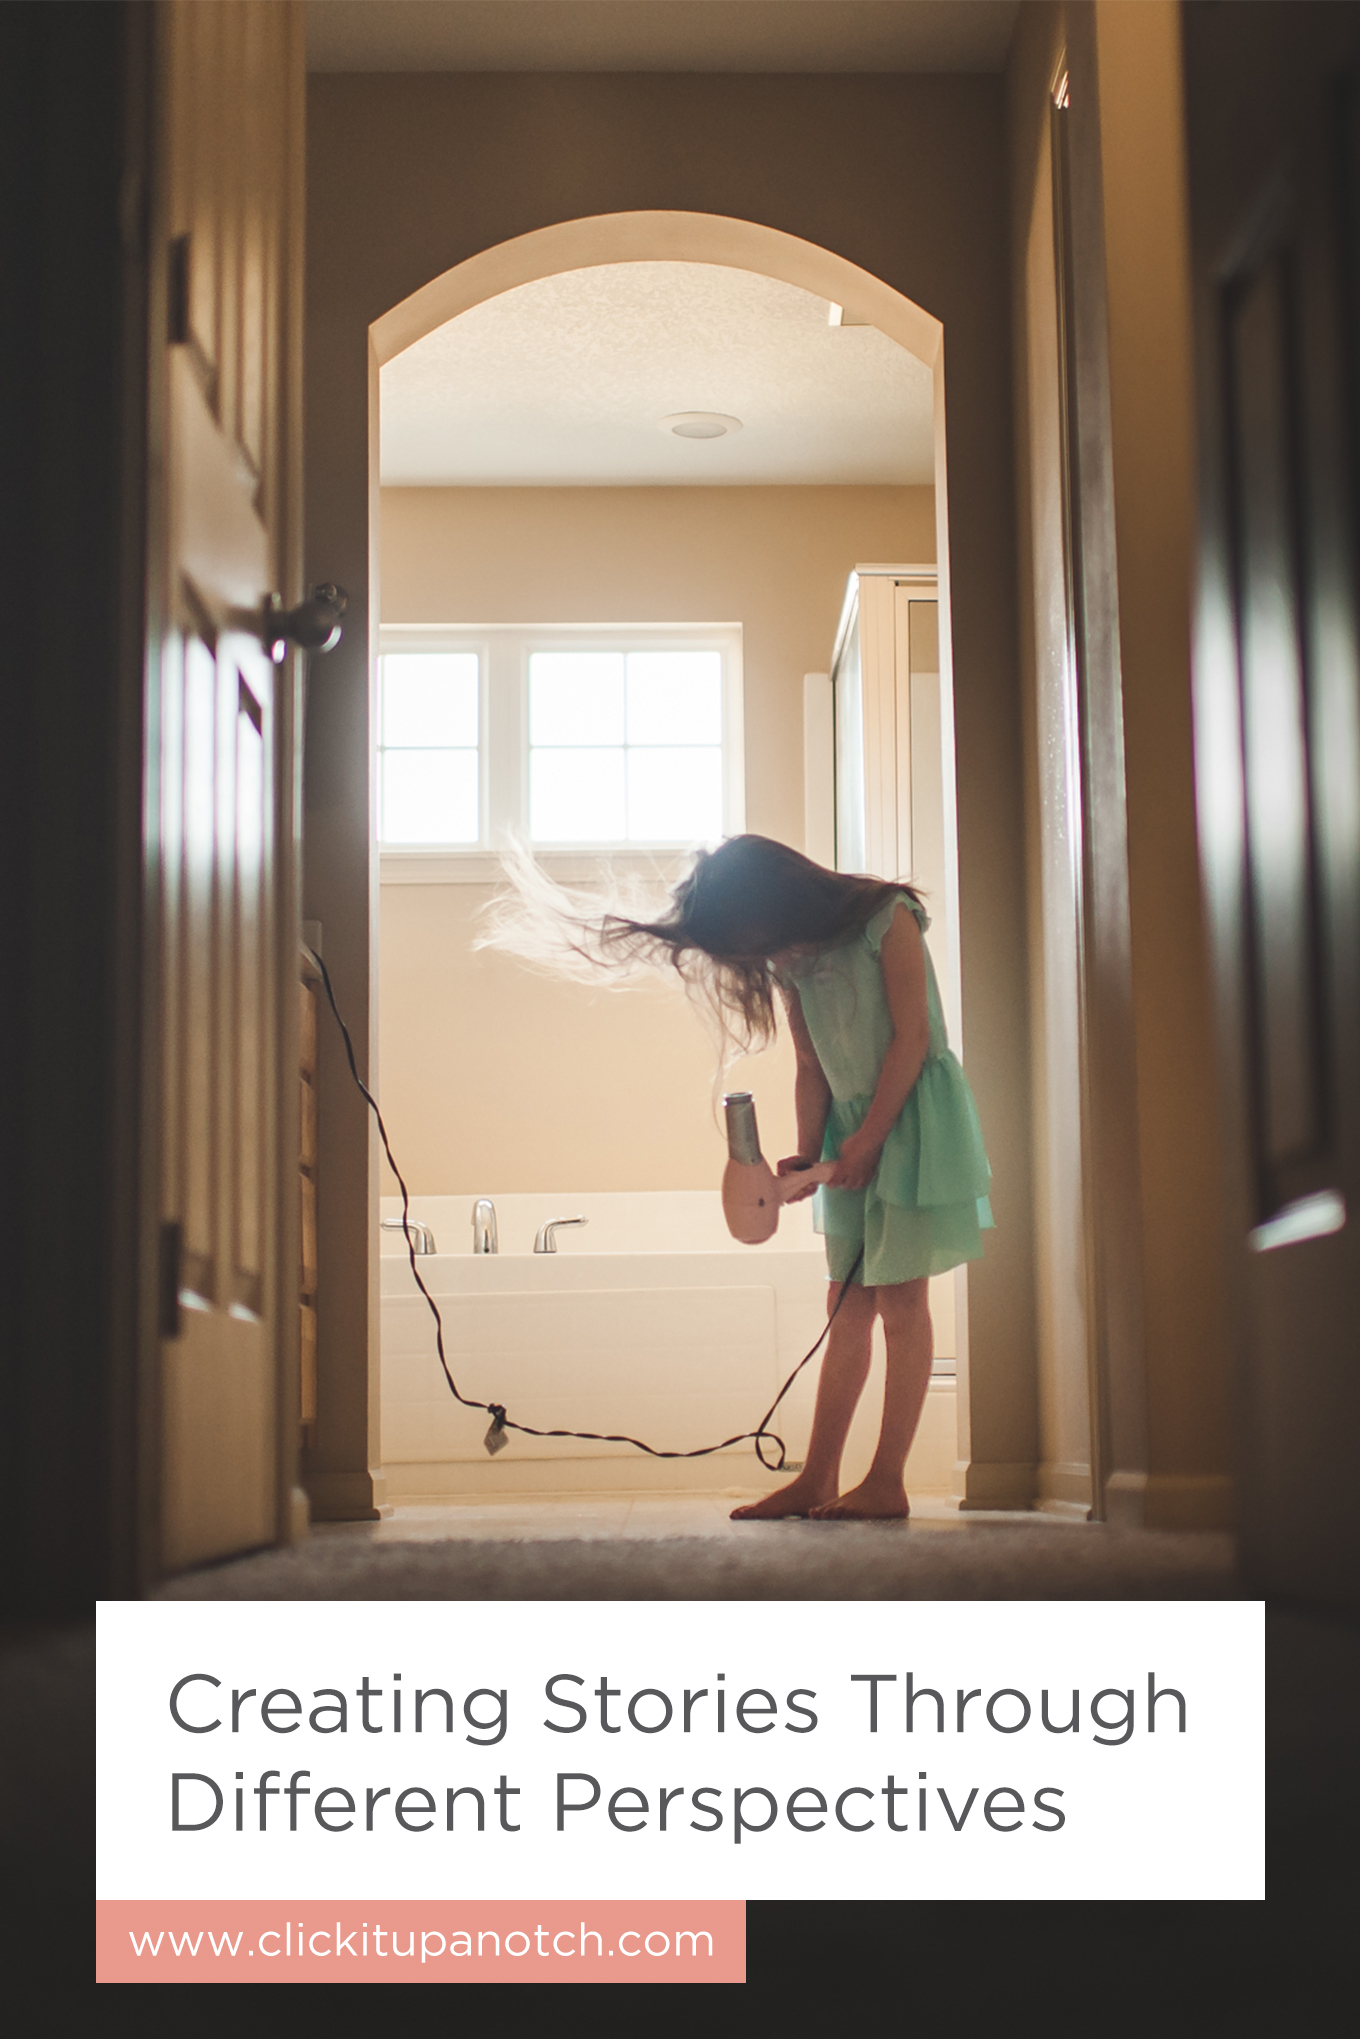 I love the very last perspective she suggested! Great list of perspectives, especially for lifestyle photography. Read - "Creating Stories Through Different Perspectives"